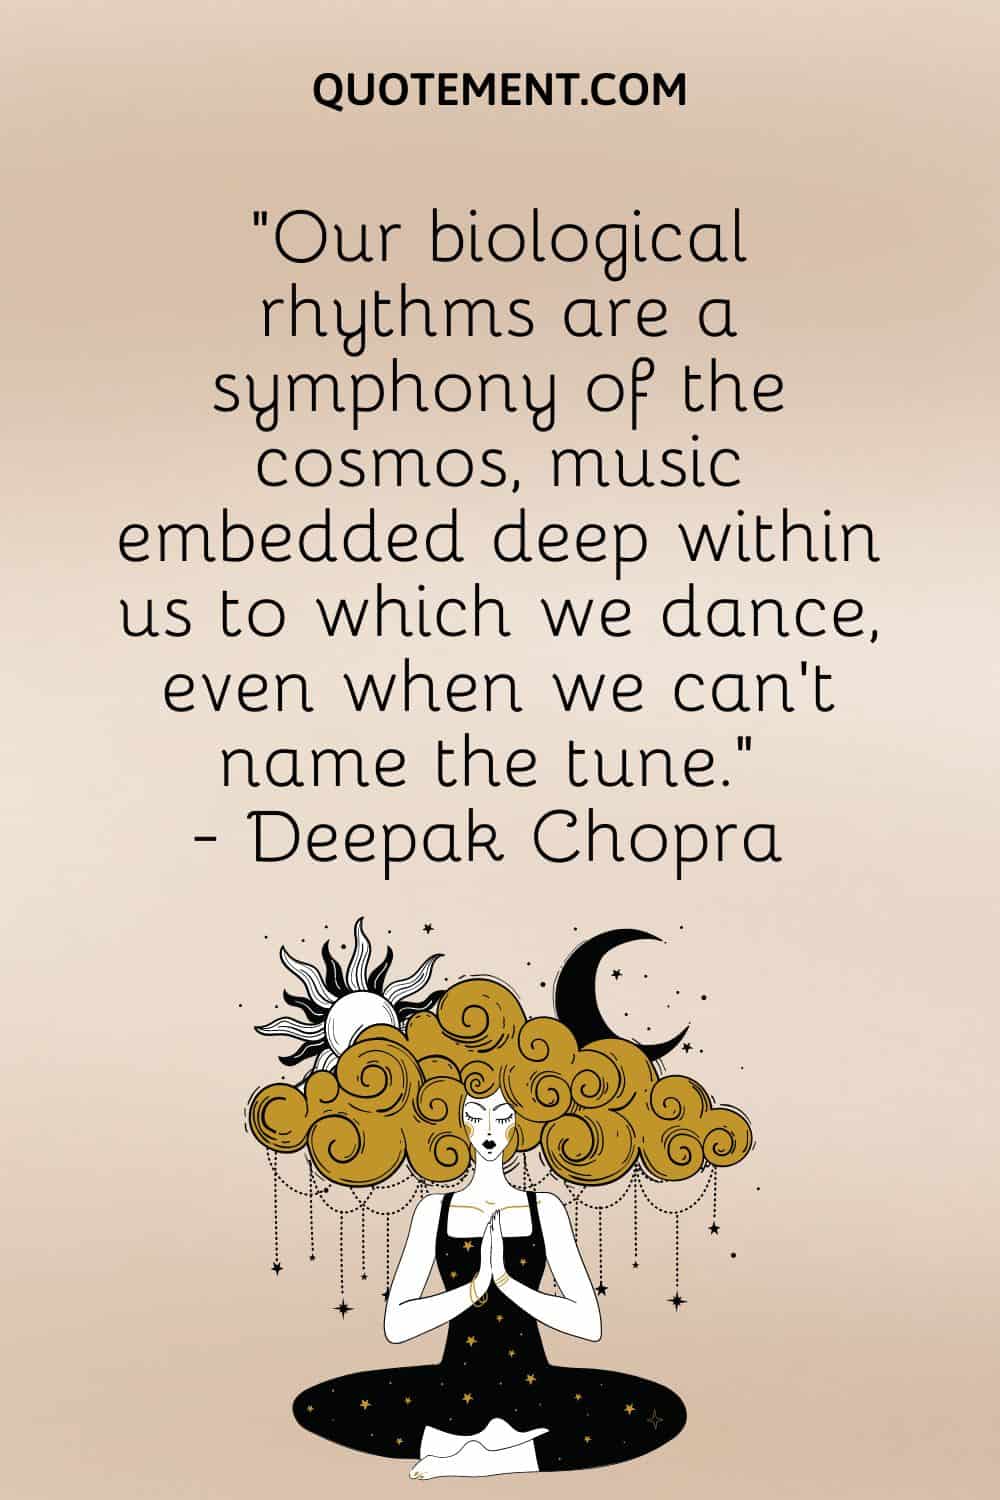 Our biological rhythms are a symphony of the cosmos